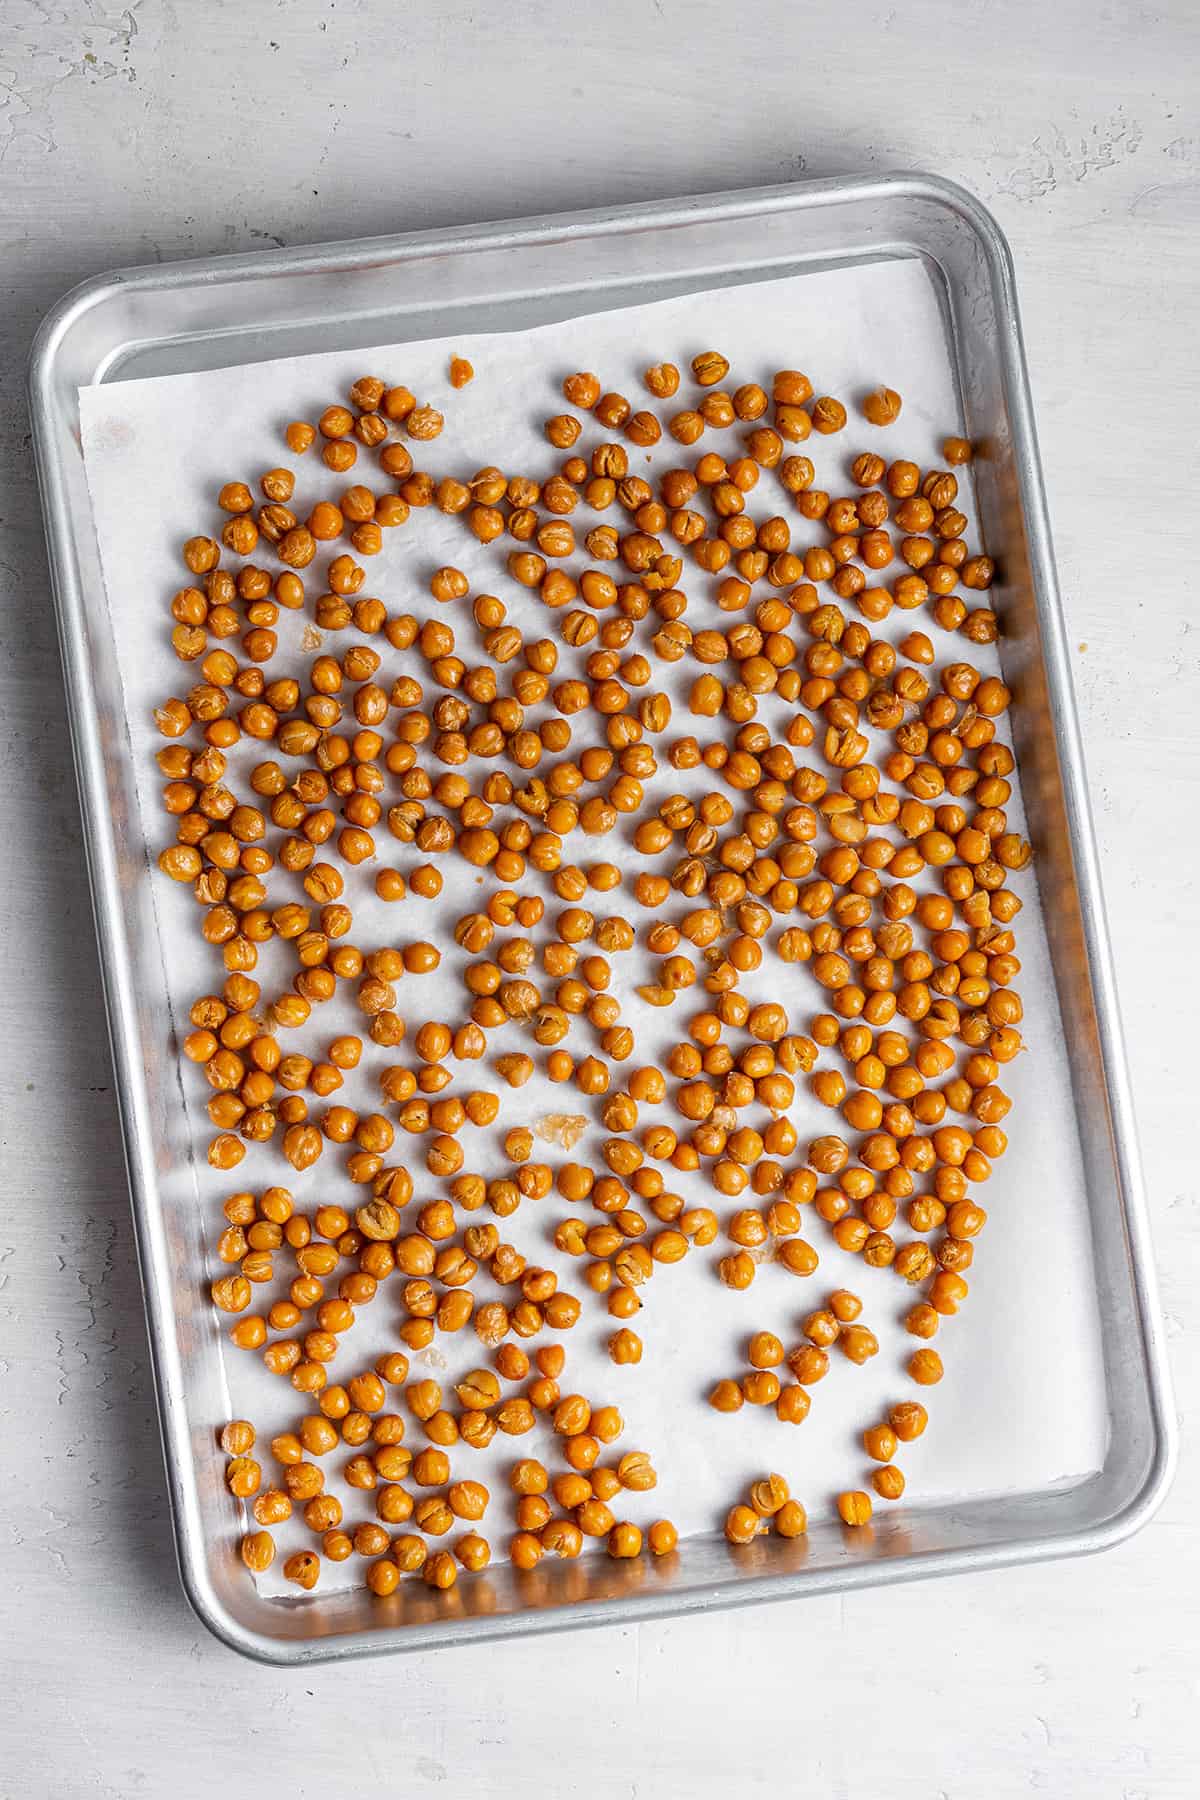 A bunch of roasted chickpeas on a baking sheet